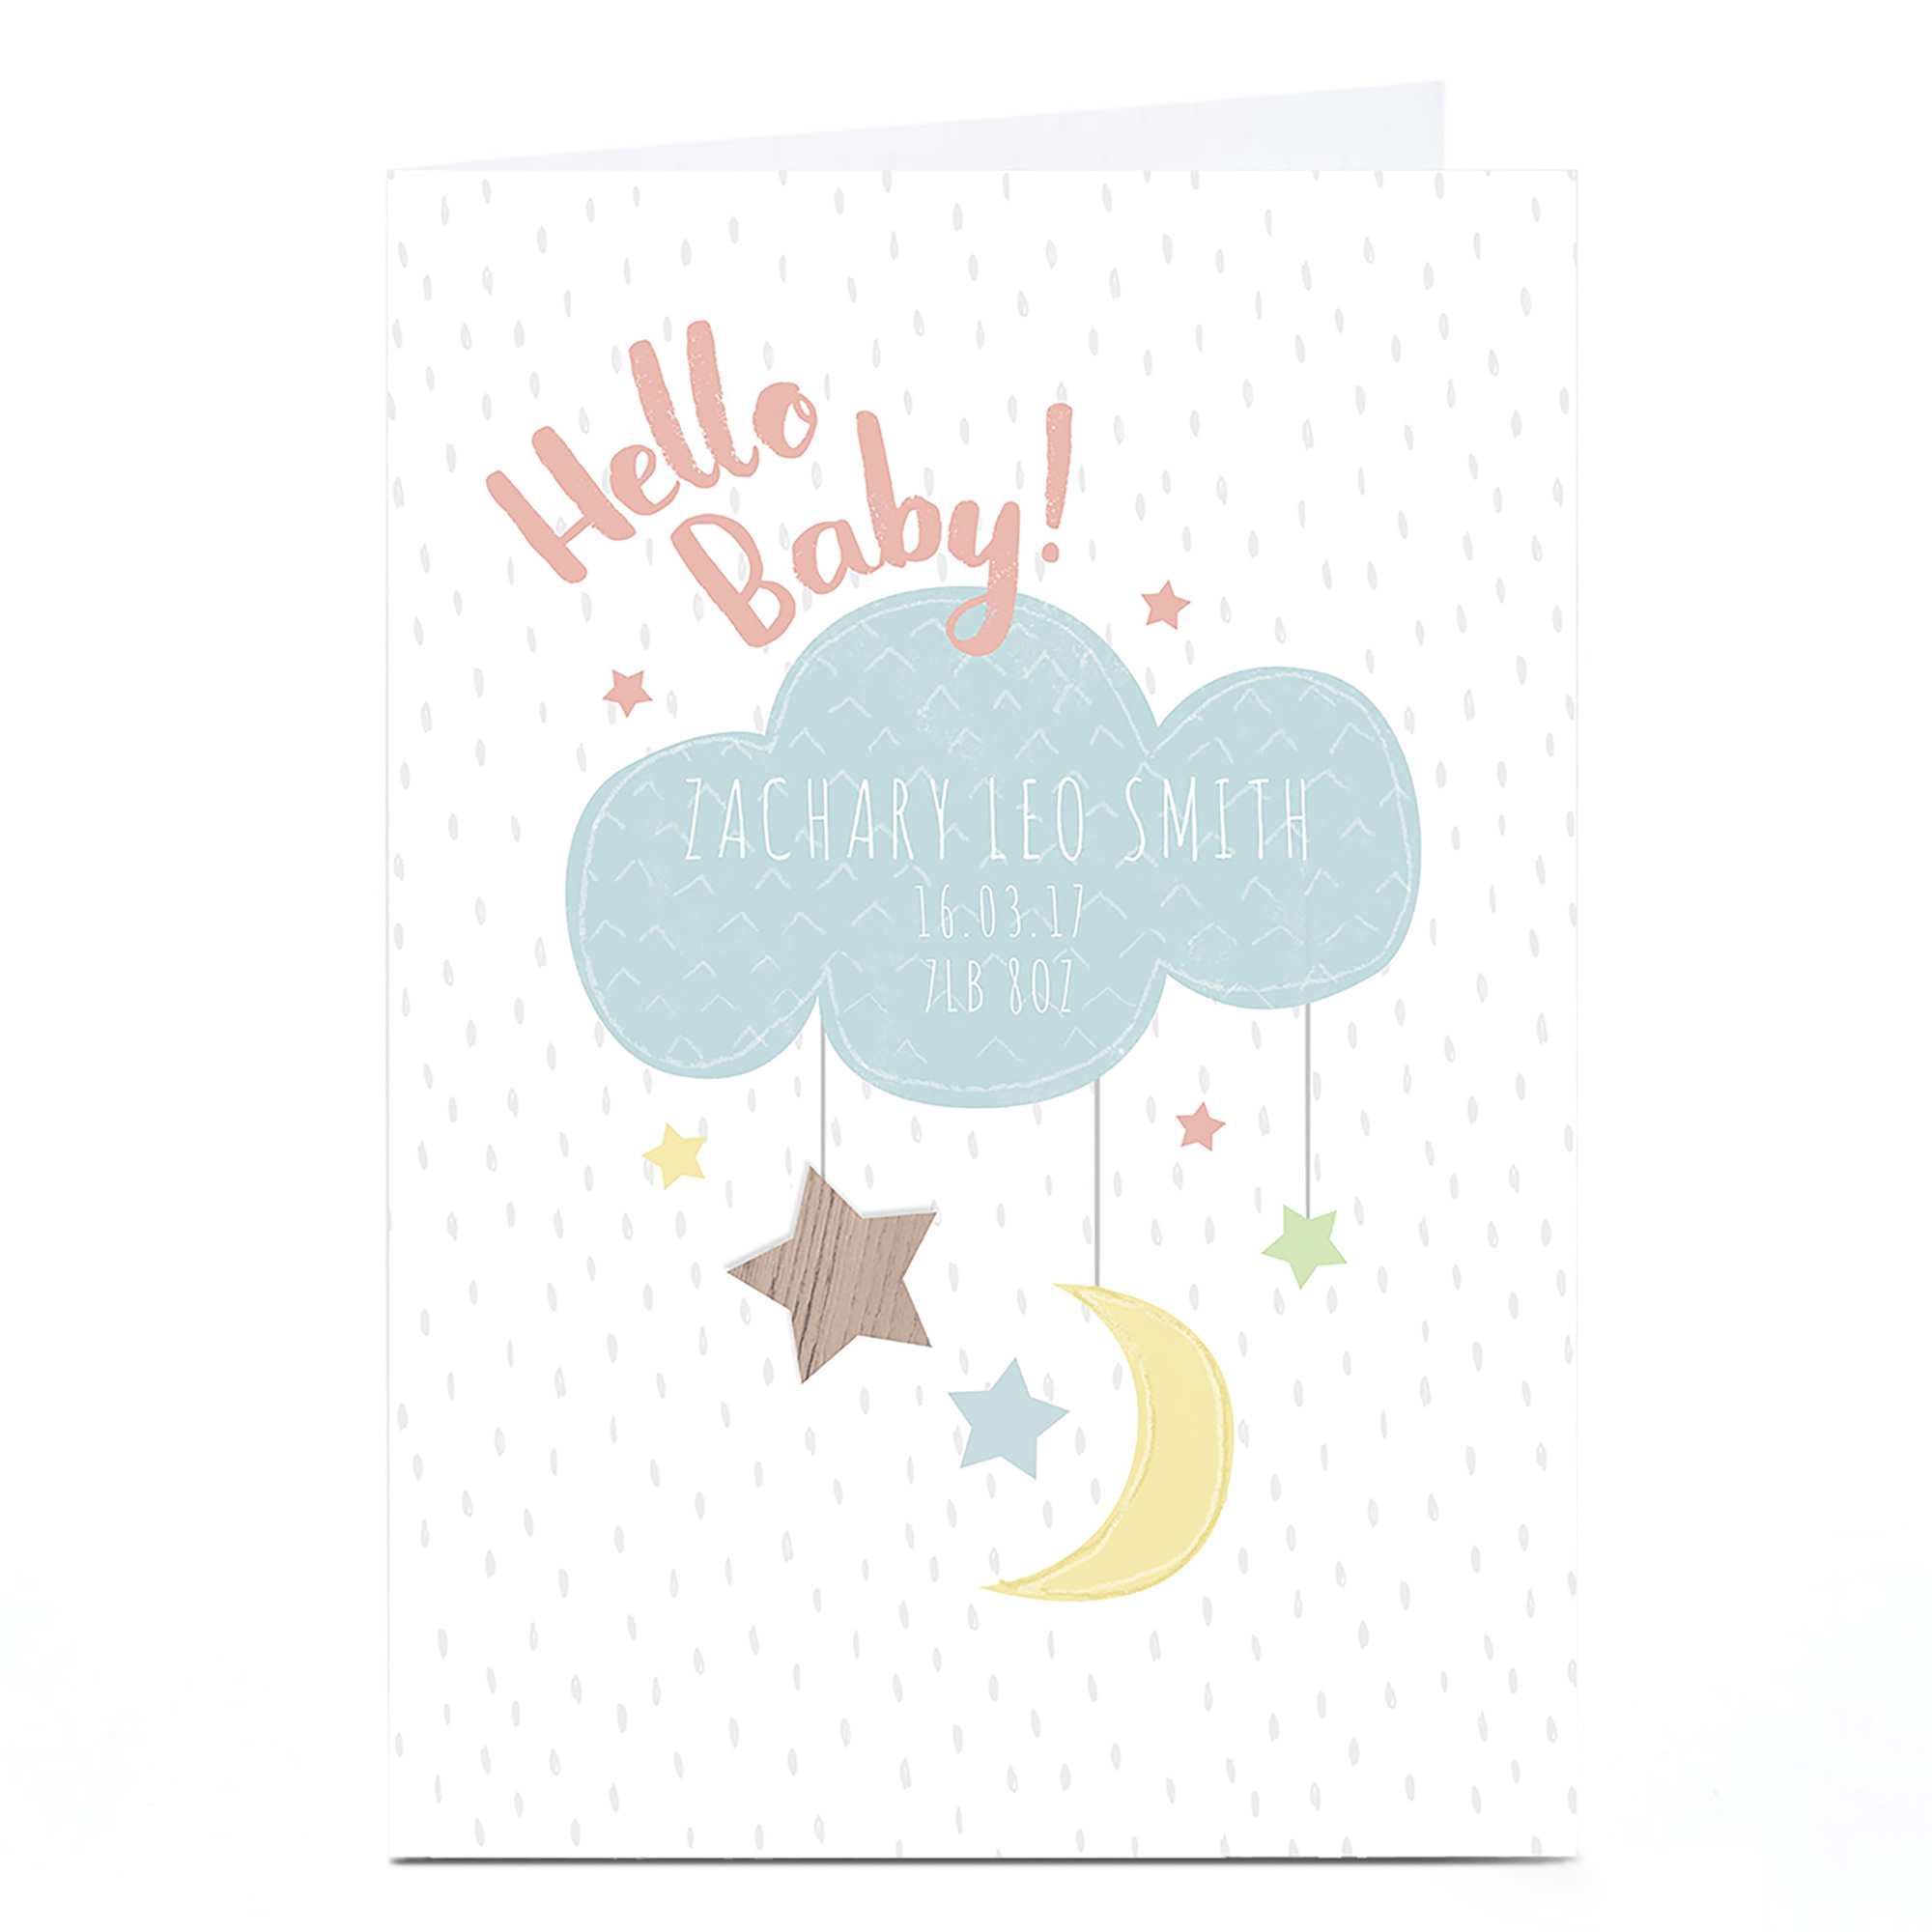 Personalised New Baby Card - Hello Baby! Mobile